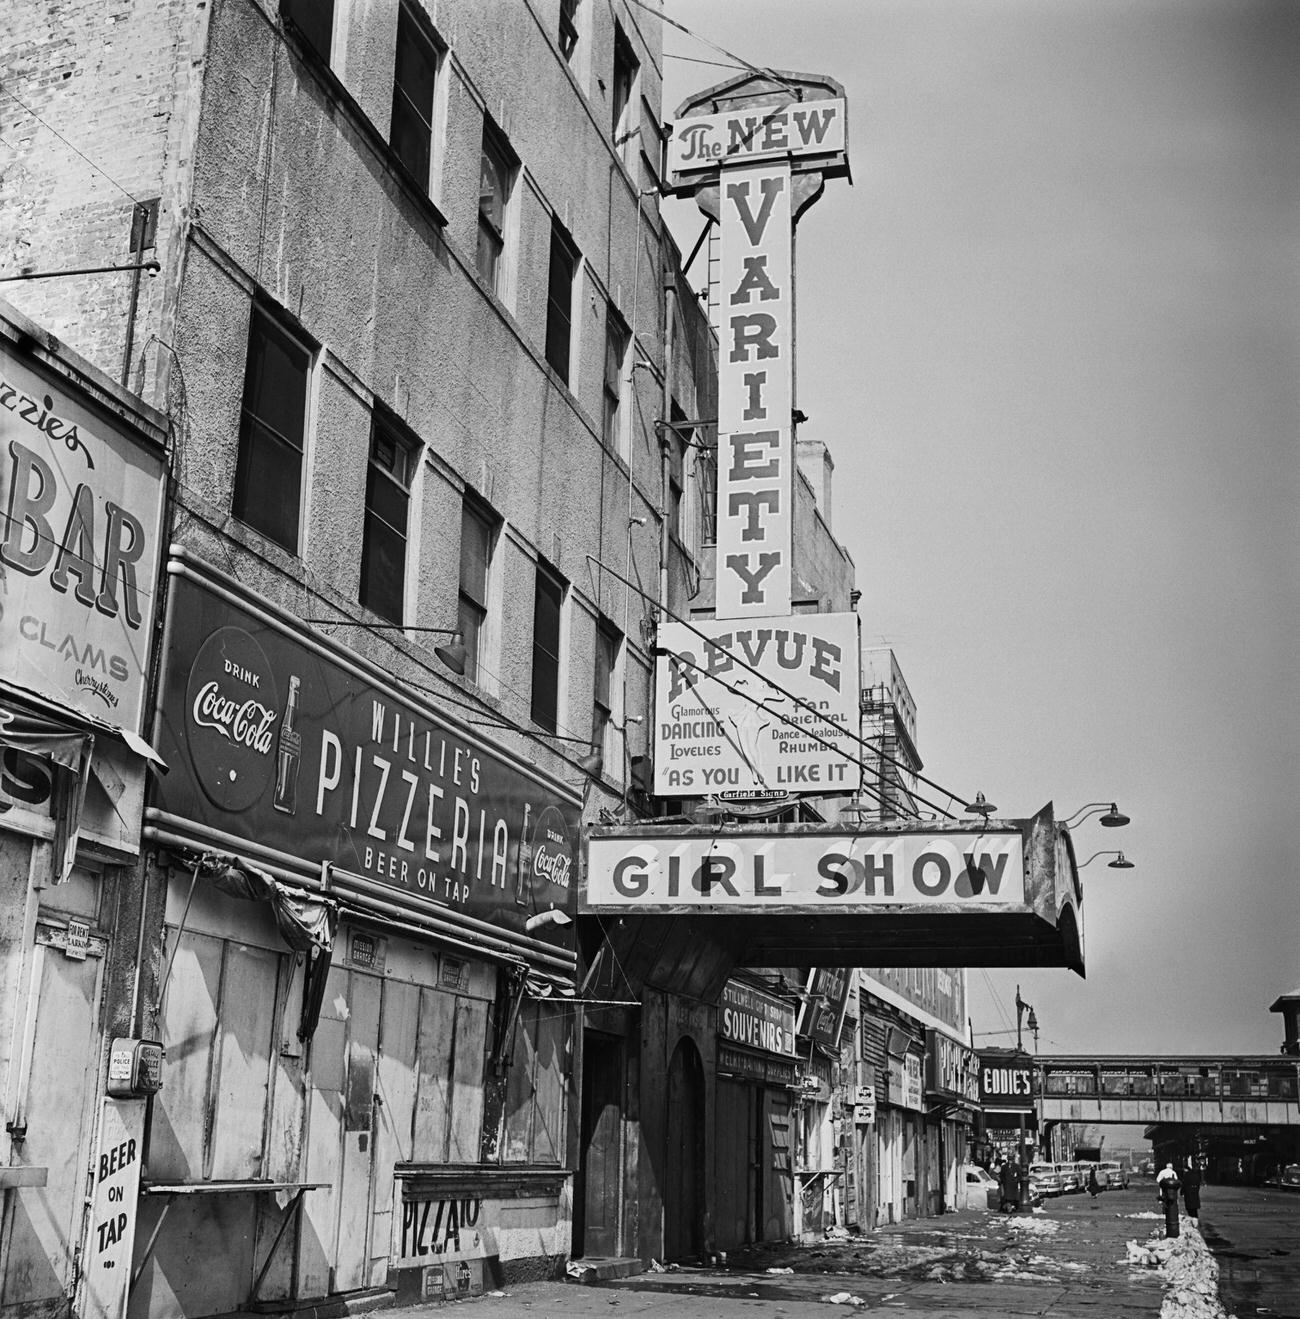 Dilapidated Exterior Of 'The New Variety Revue' In Coney Island, Brooklyn, 1950.